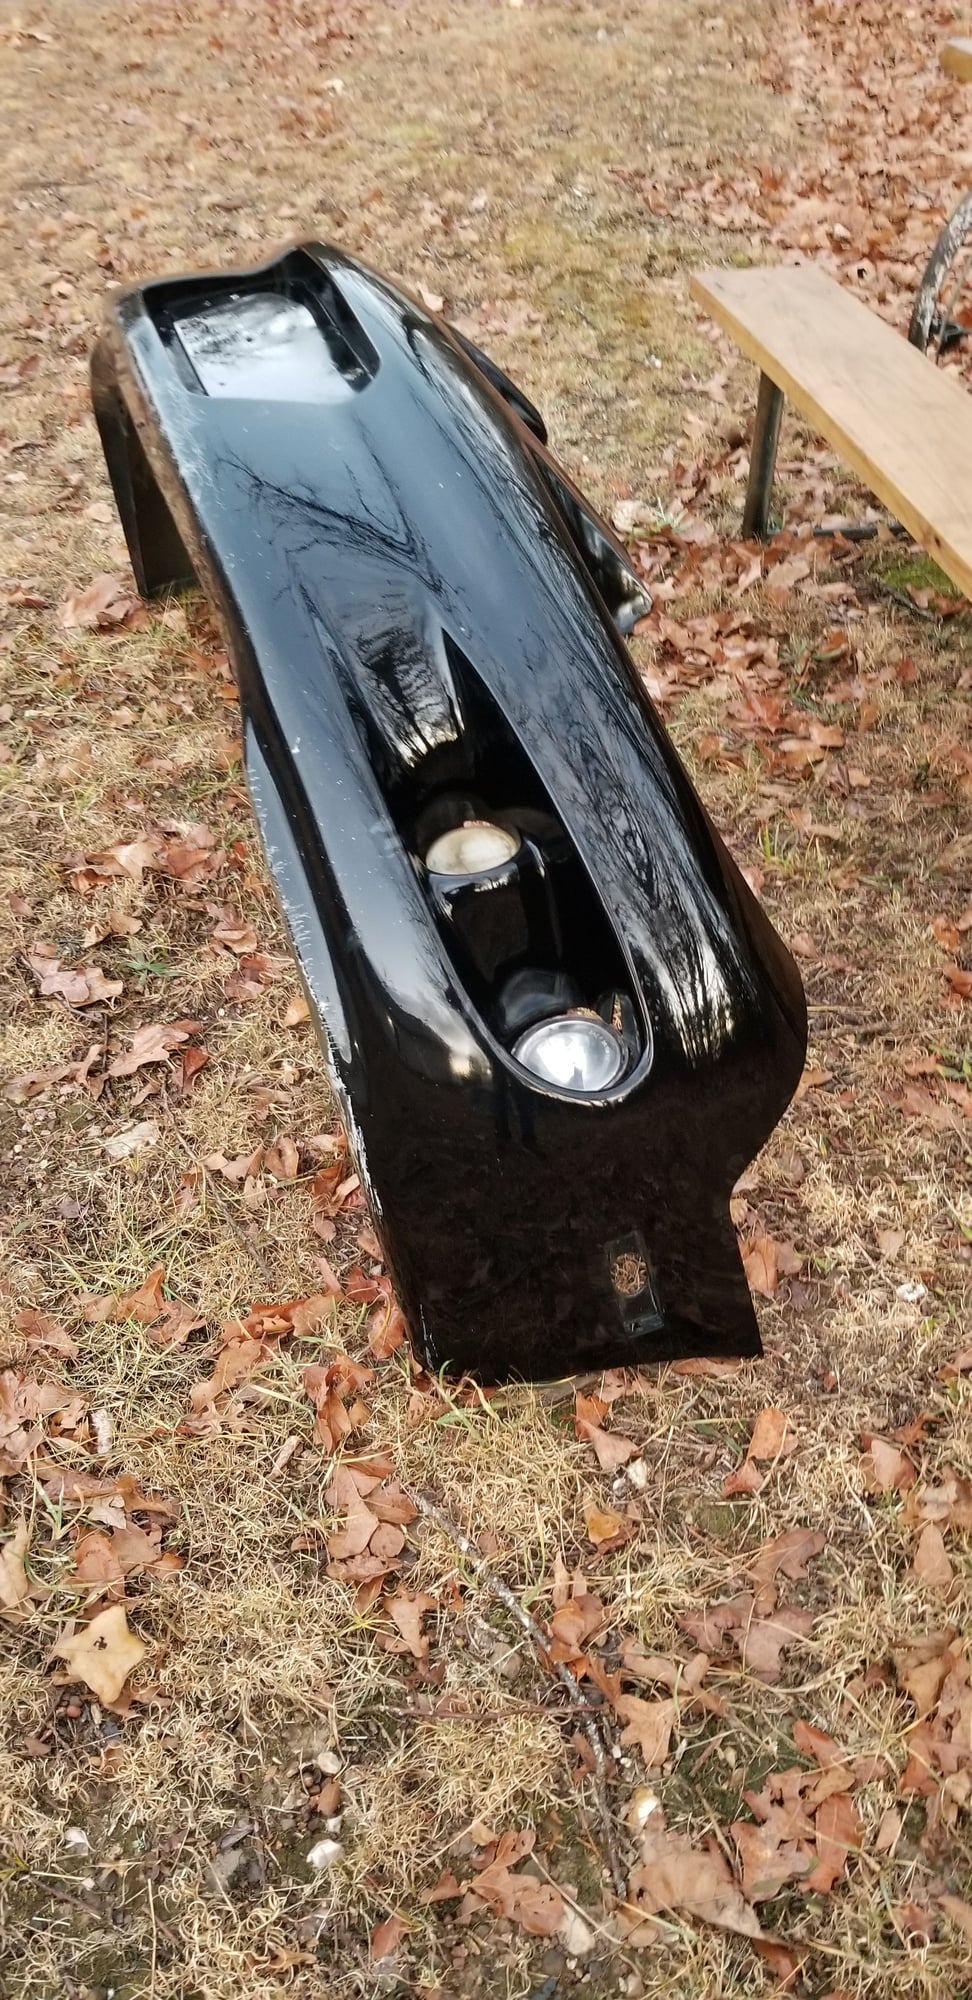 Exterior Body Parts - Trans Am/Firebird Bumpers - Used - 1993 to 2002 Pontiac Firebird - West Plains, MO 65775, United States